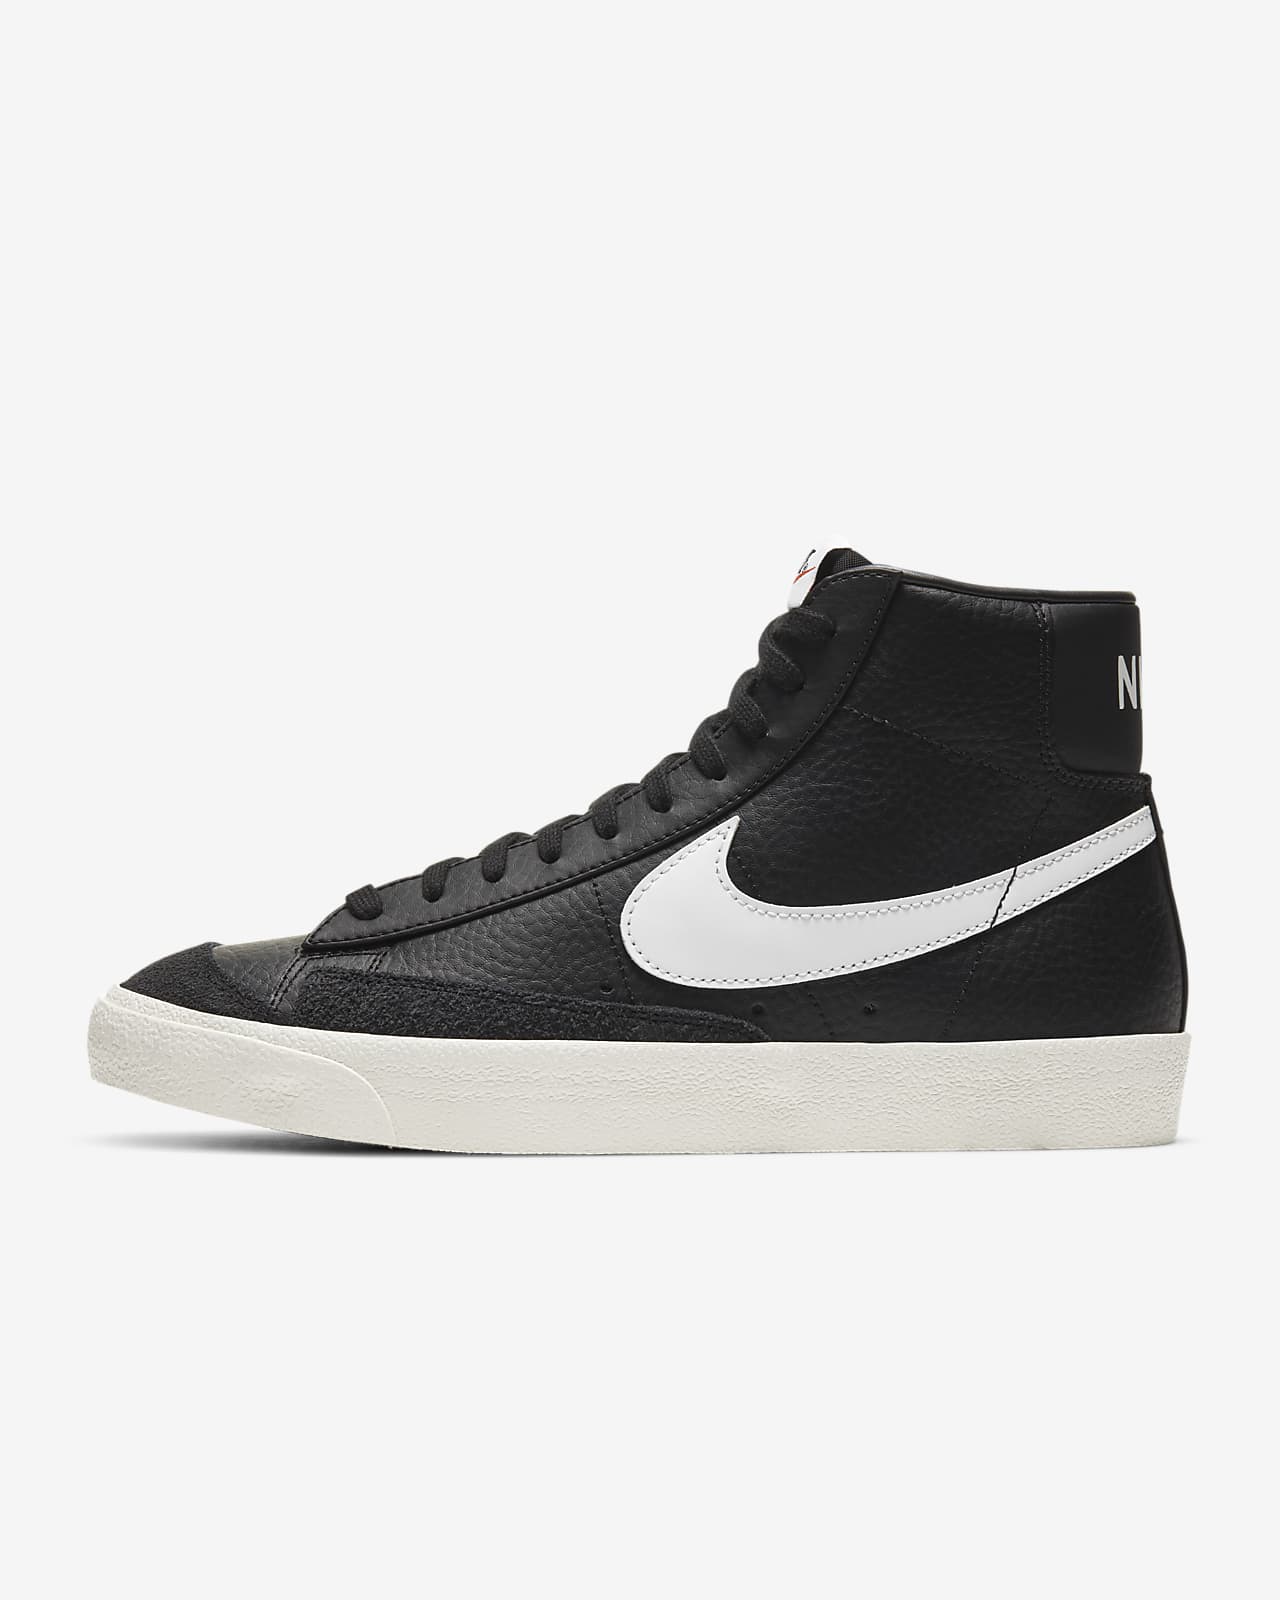 By-product format main land Nike Blazer Mid '77 Vintage Men's Shoes. Nike.com